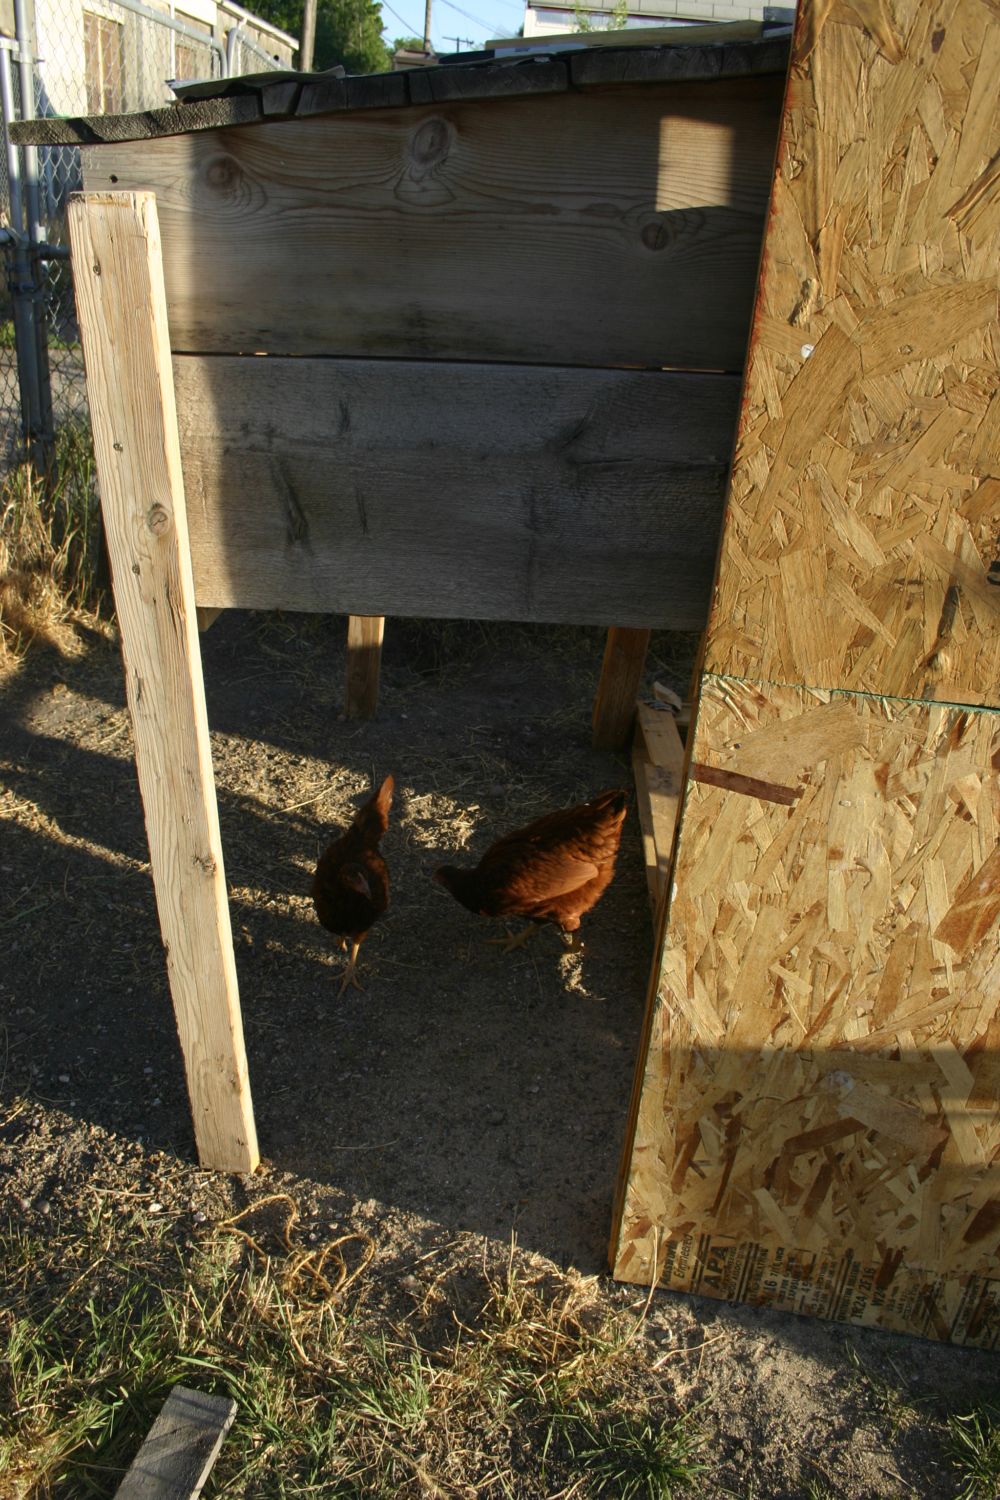 GOAL: Chicken Coop for under $50 with Pallets! (**Progress Pics!**)